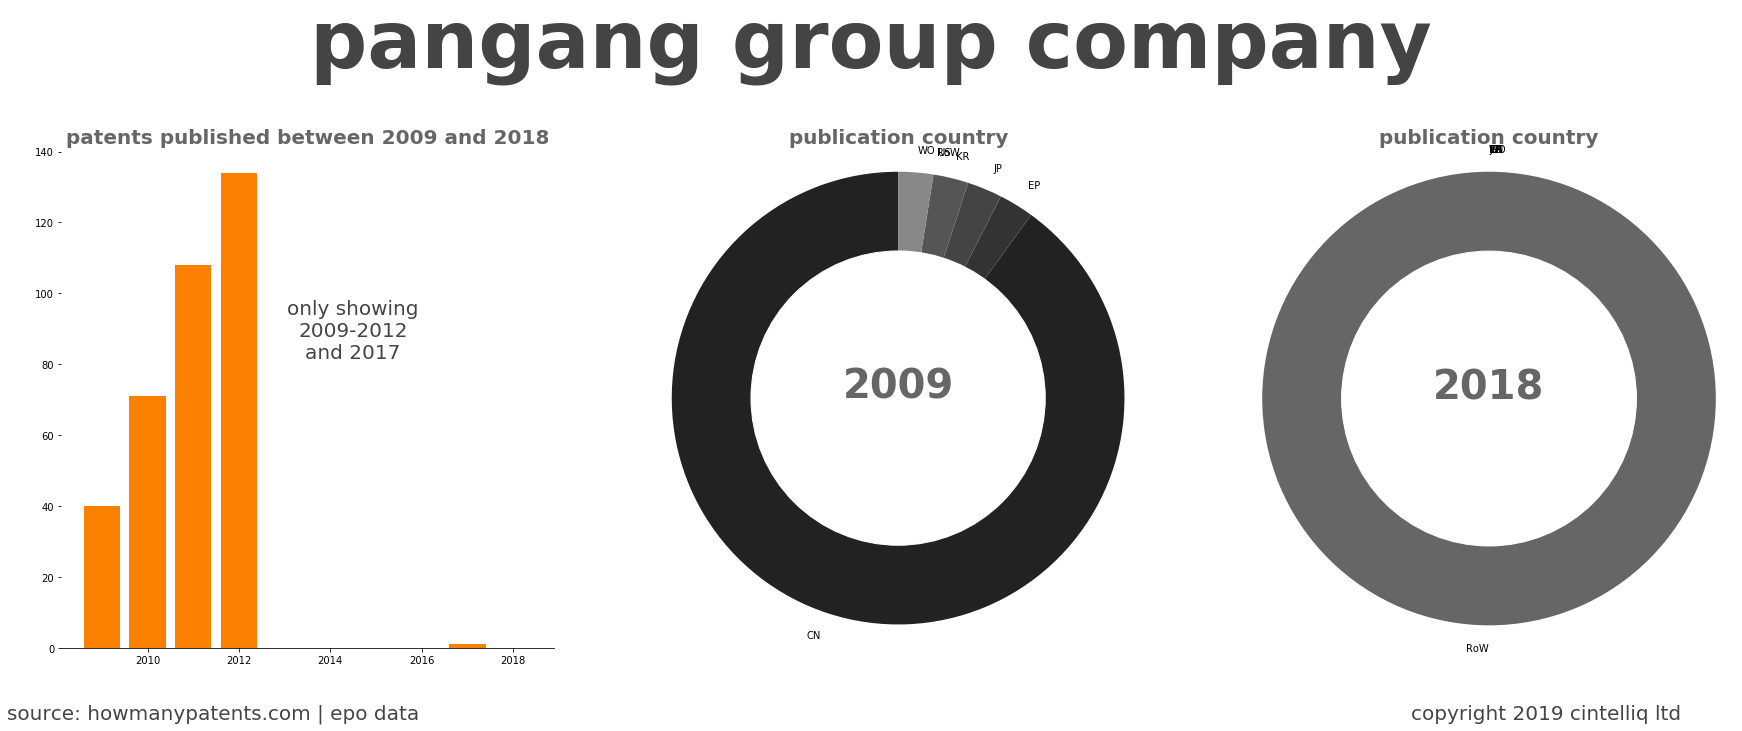 summary of patents for Pangang Group Company